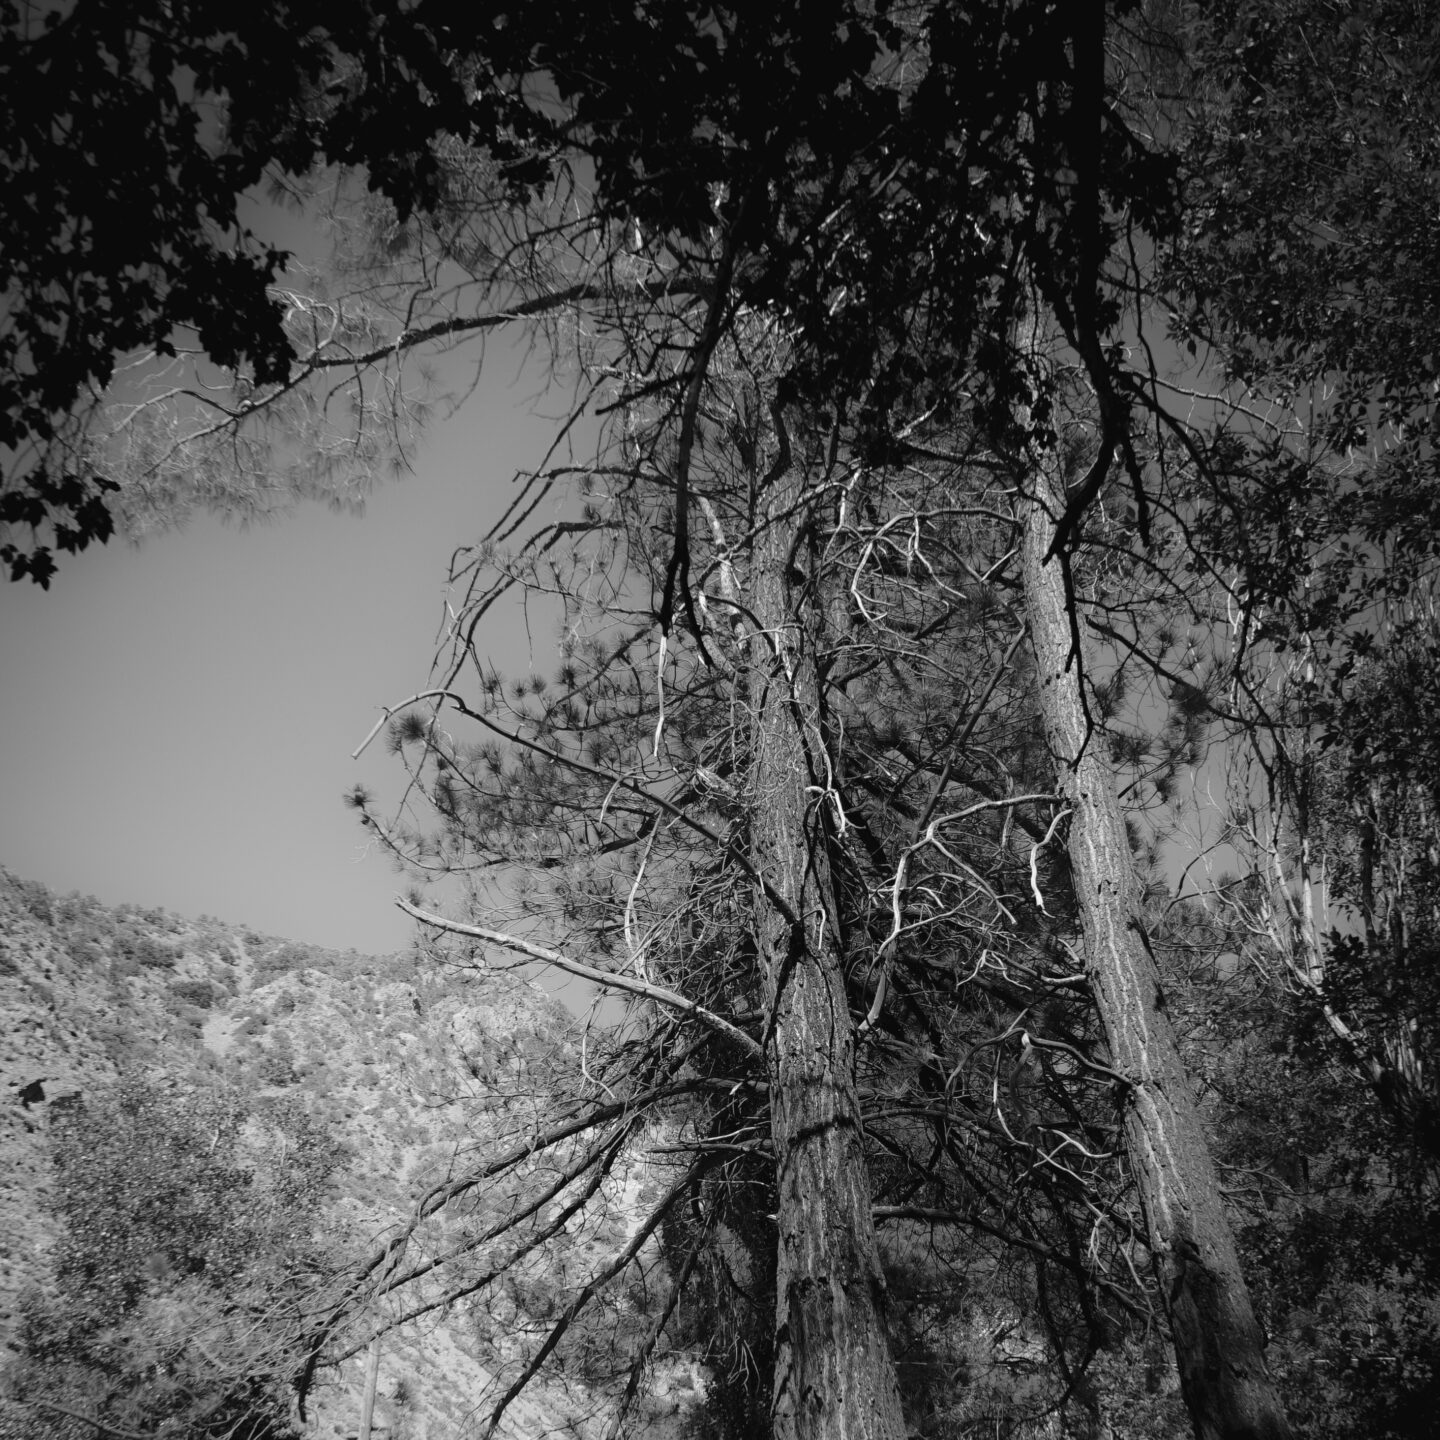 Paradise Springs Landscape 07 – Trees in Black and White [Photography]